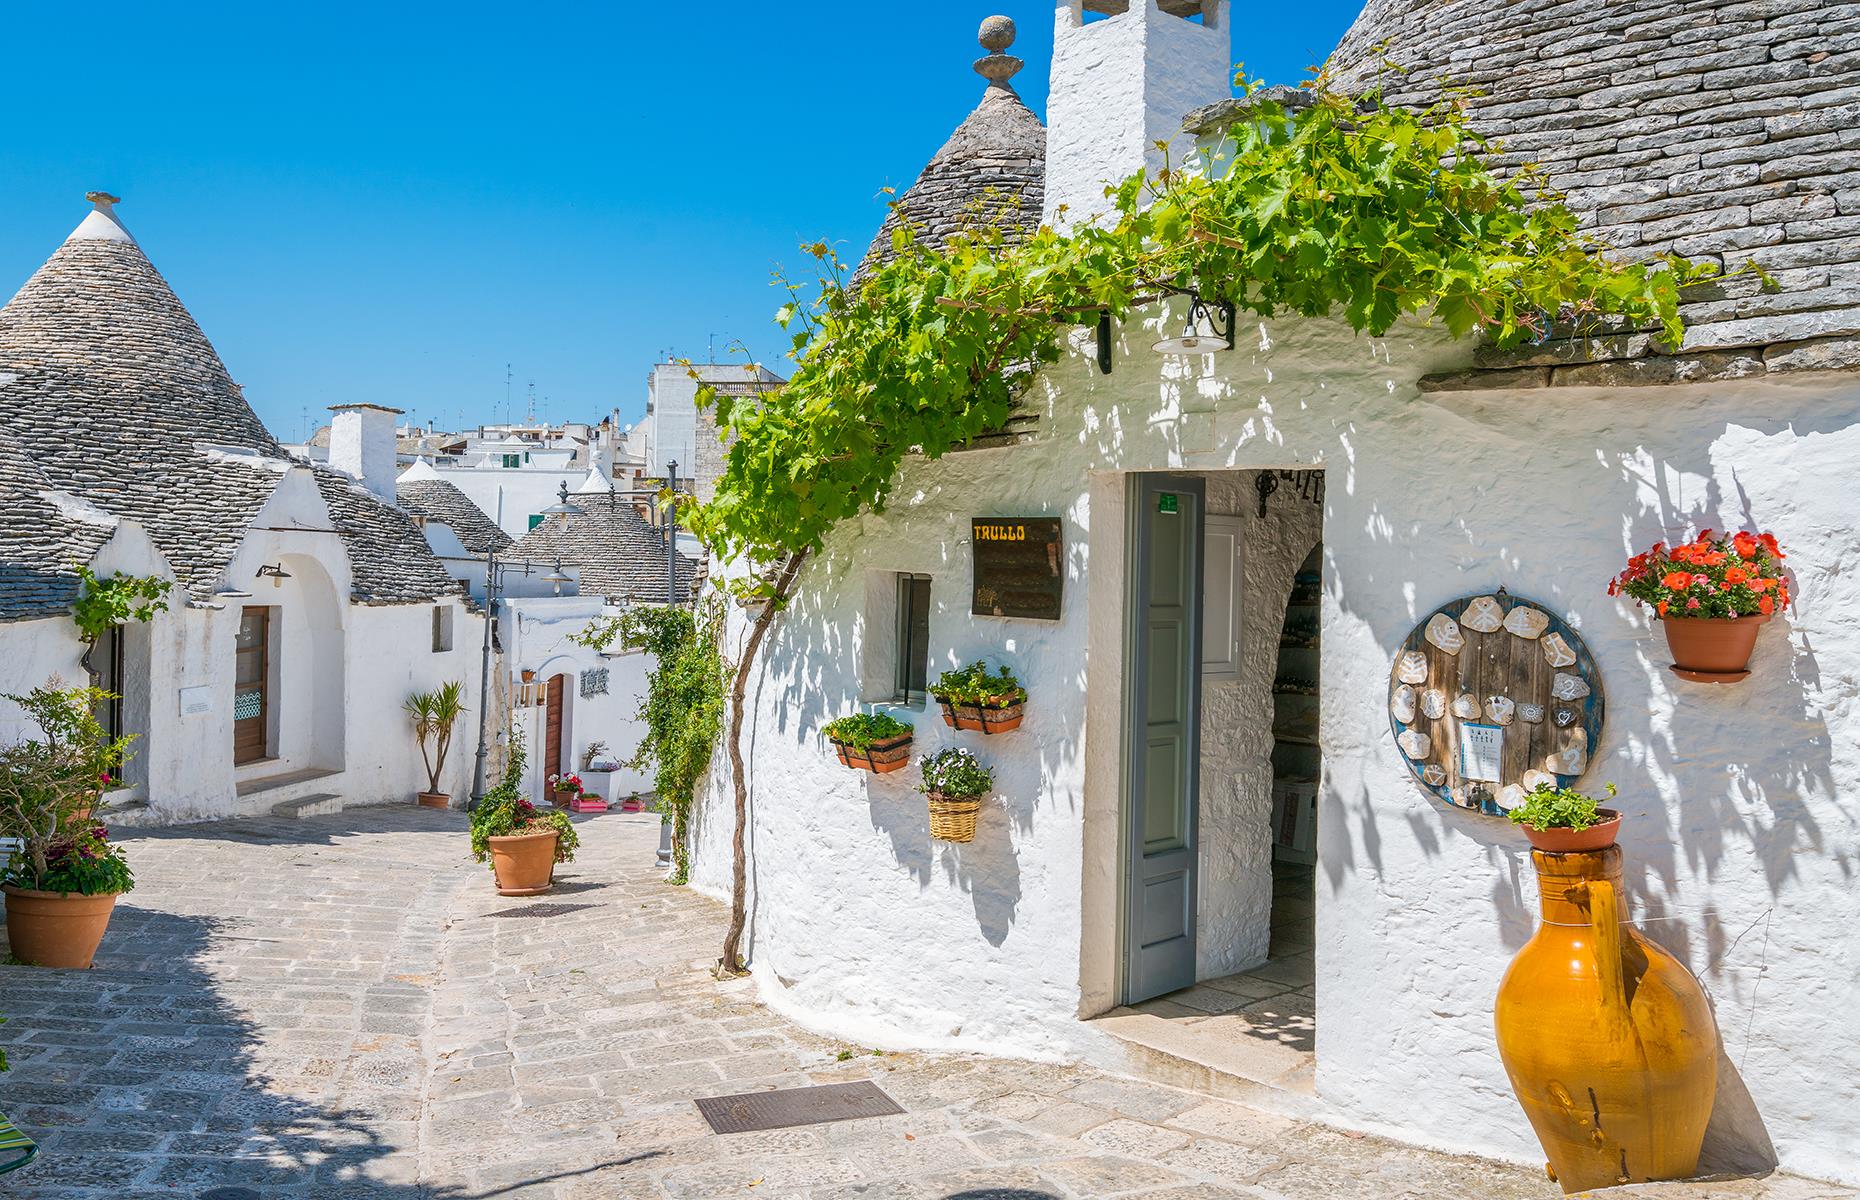 Slide 10 of 31: It's almost impossible not to find a picture-perfect street in Alberobello, a UNESCO World Heritage Site in its entirety. The small town in Italy's heel – Puglia – is famous for its unusual trulli houses, built from whitewashed local limestone, with conical roofs.